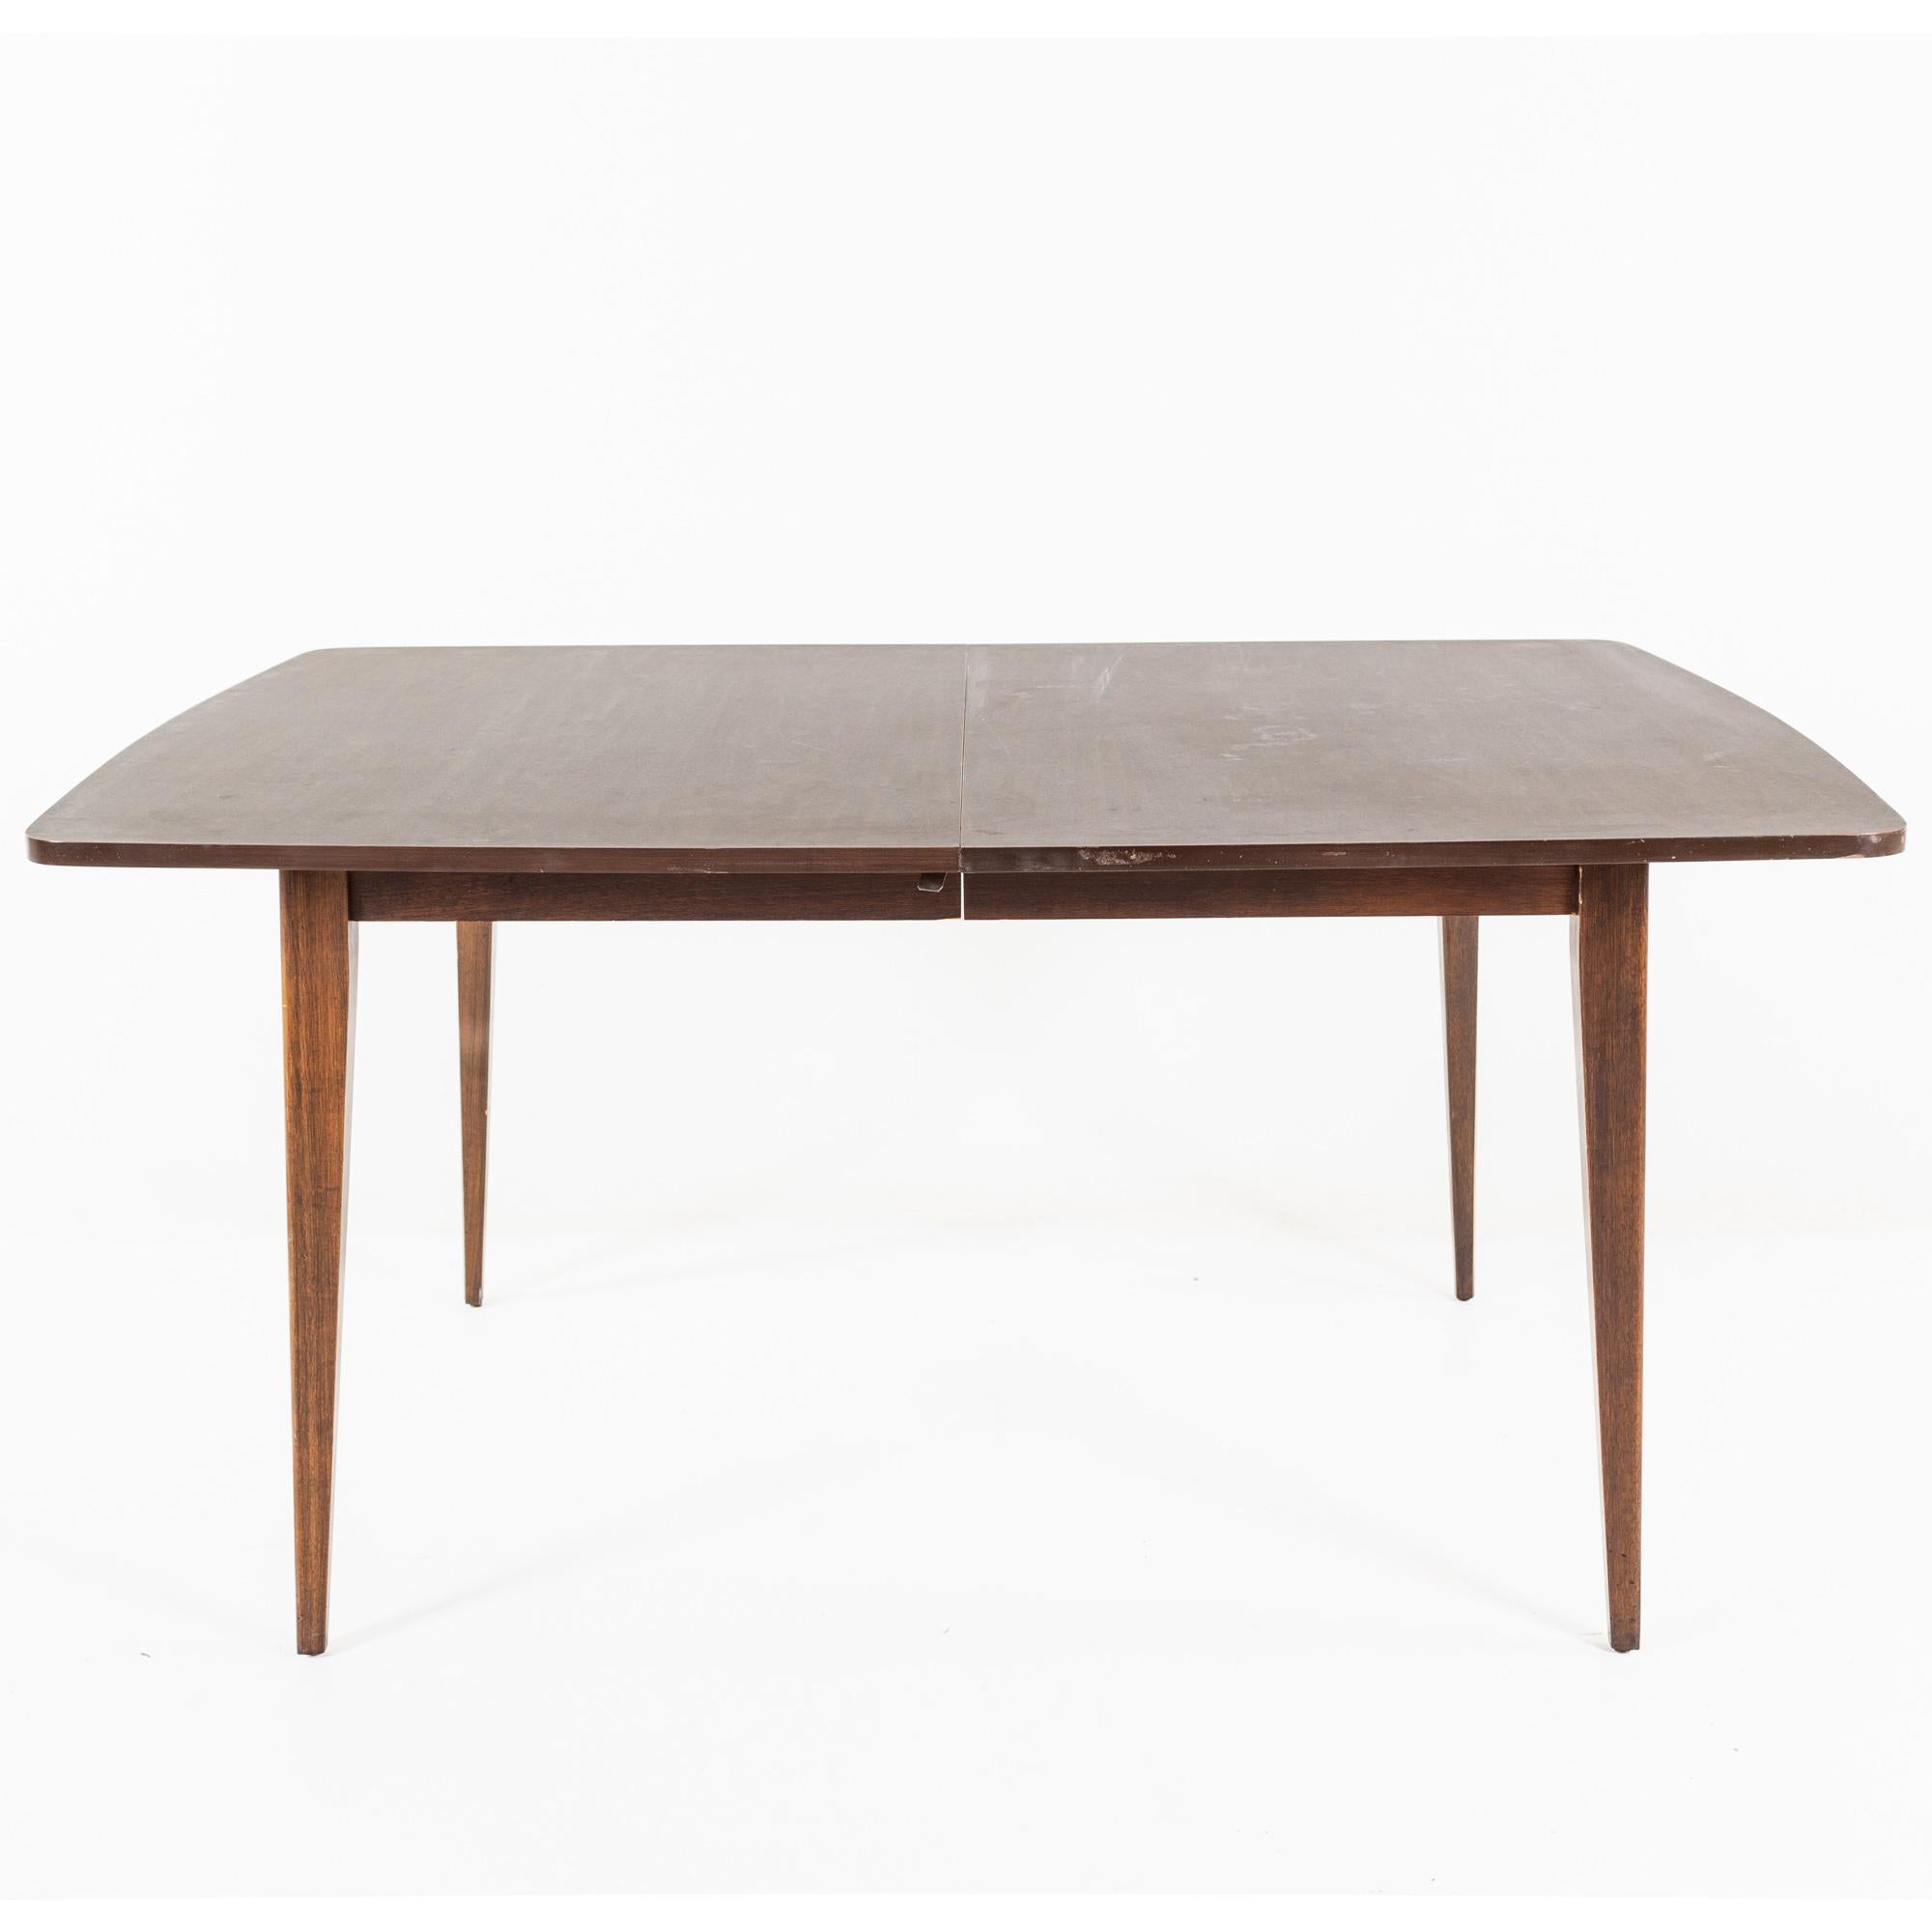 Broyhill style mid century walnut laminate dining table

Table measures: 58 wide x 41 deep x 29 high, with a chair clearance of 25.5 inches

All pieces of furniture can be had in what we call restored vintage condition. That means the piece is